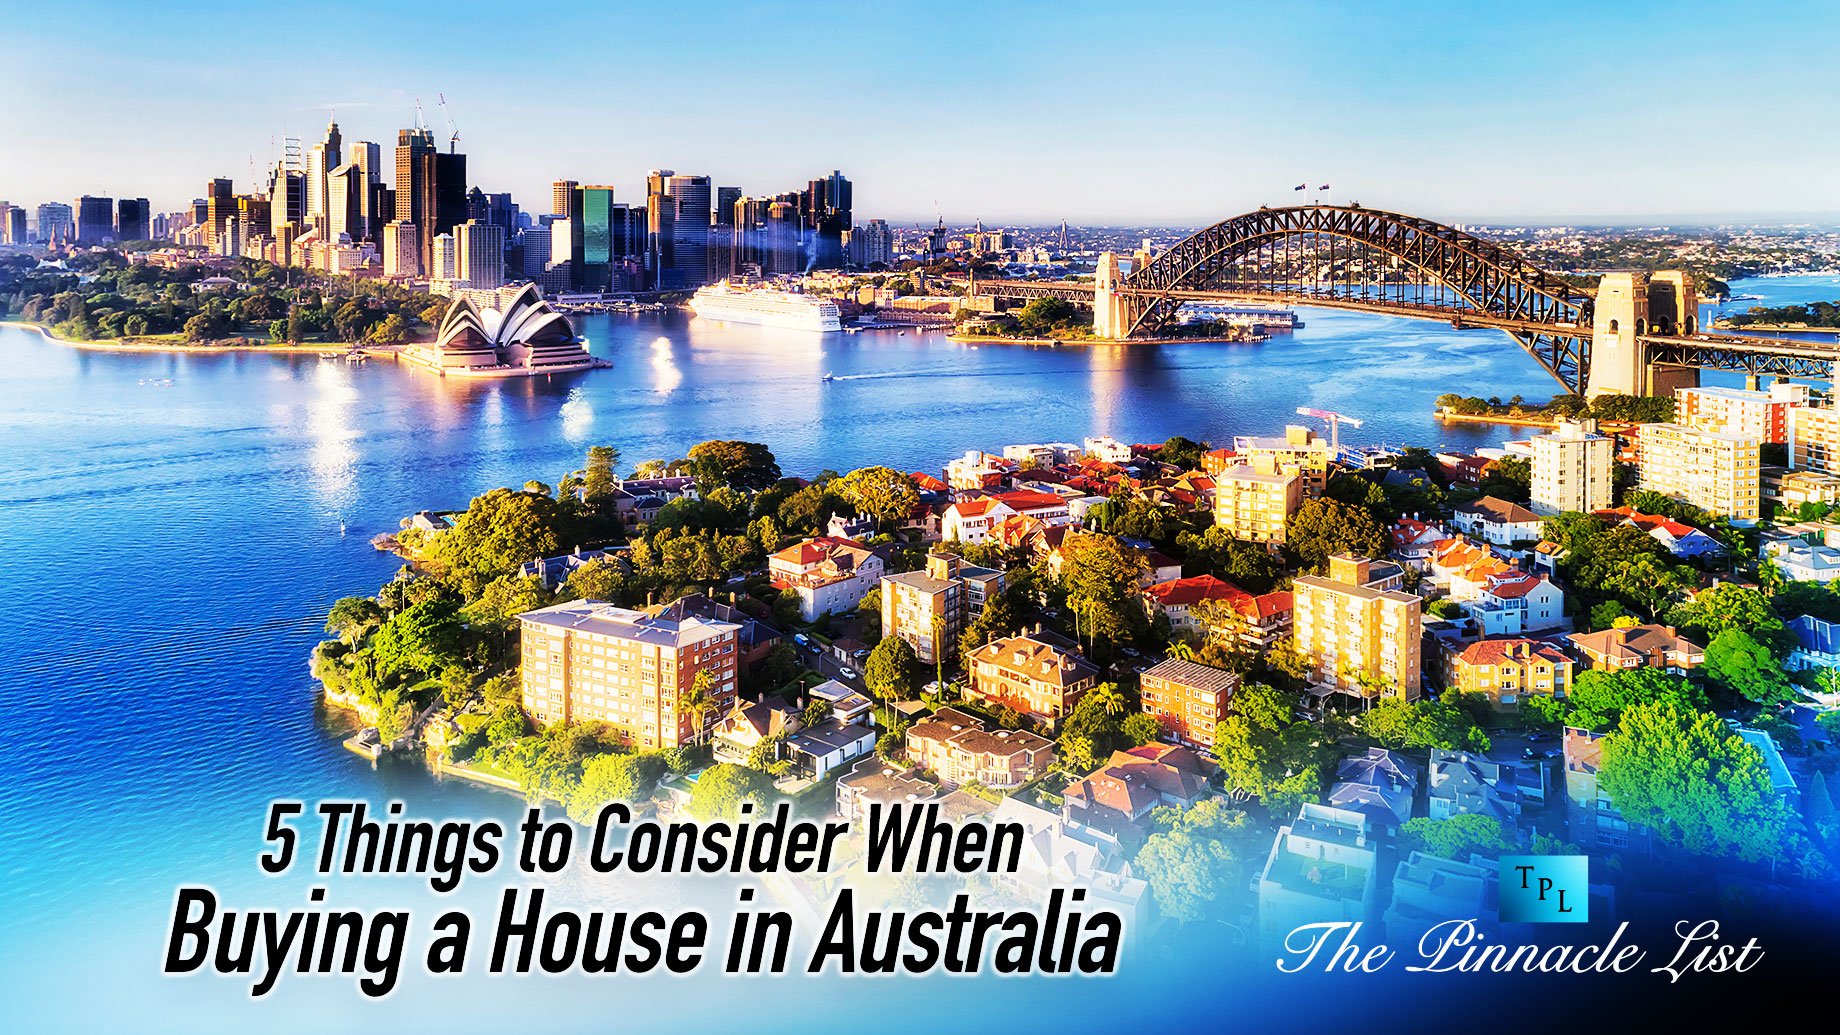 5 Things to Consider When Buying a House in Australia